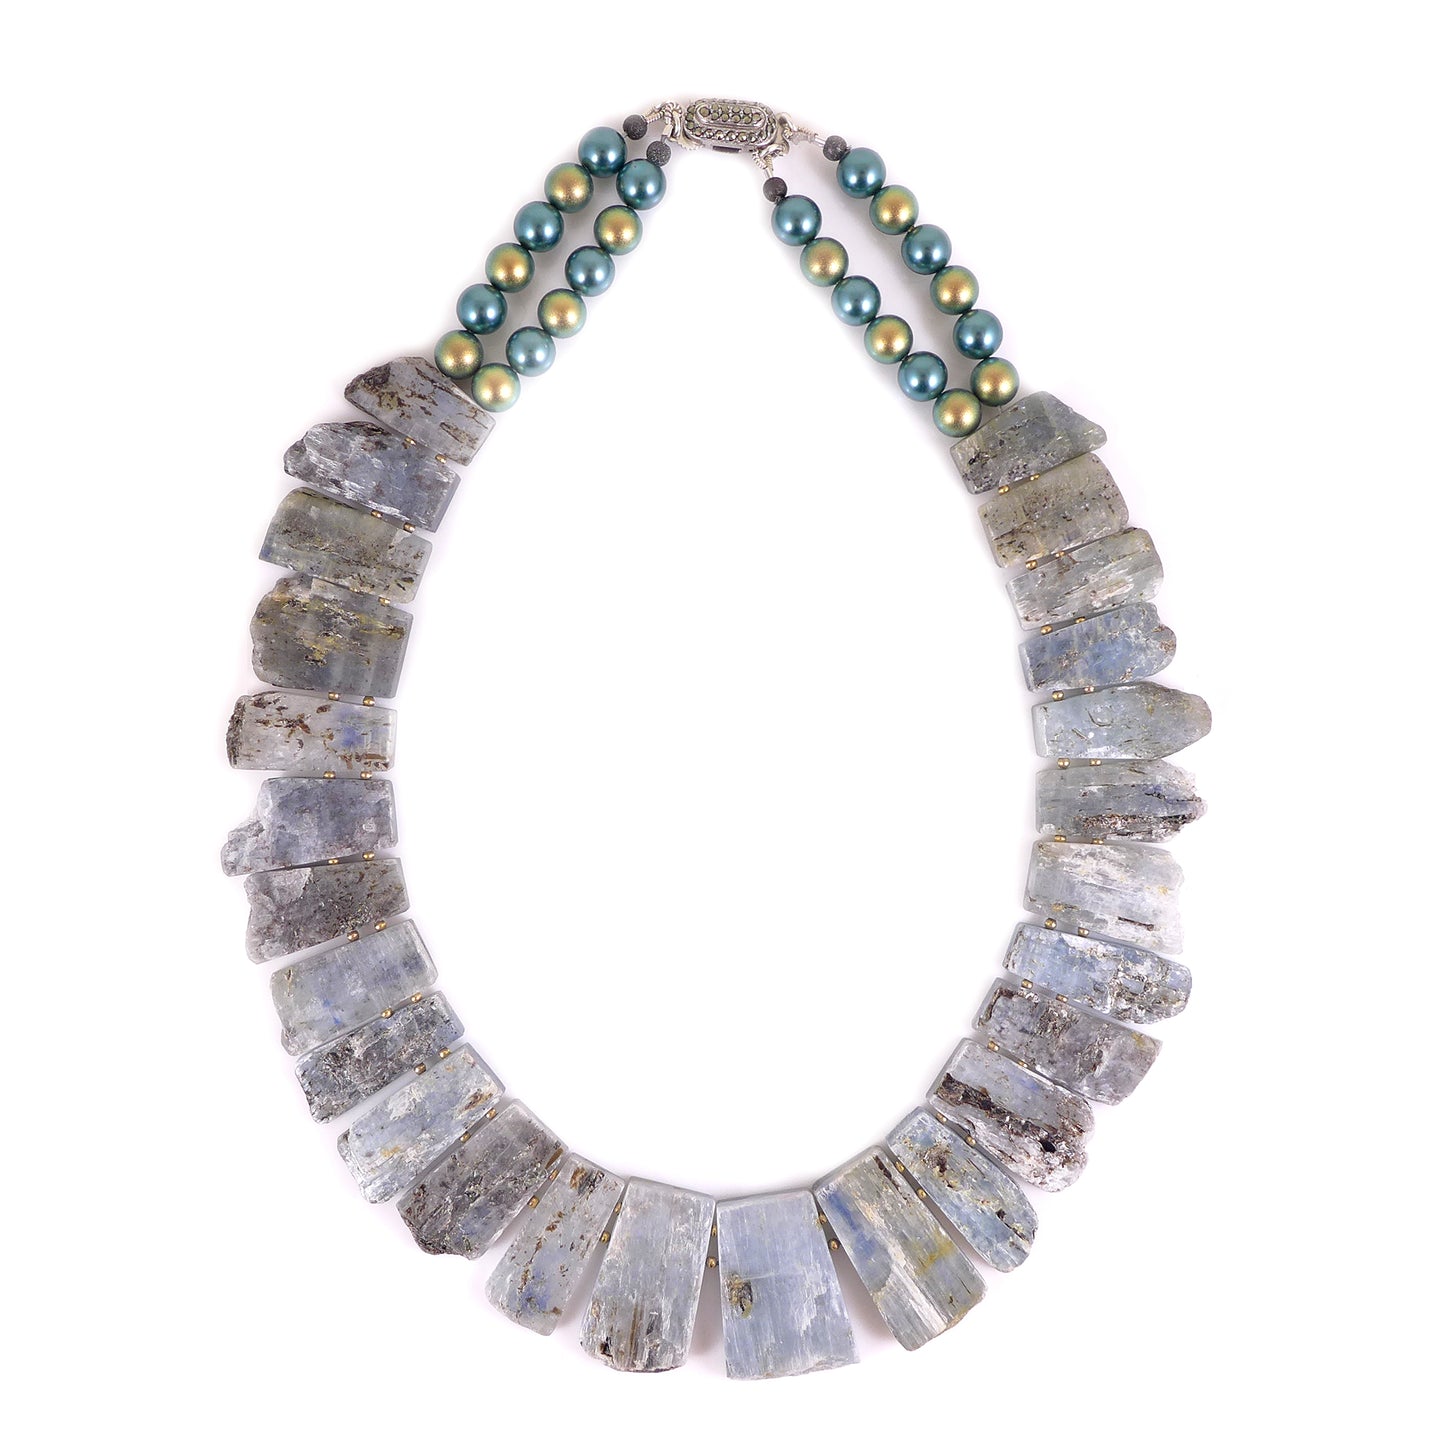 Kyanite Gemstone Necklace - ONE OF A KIND